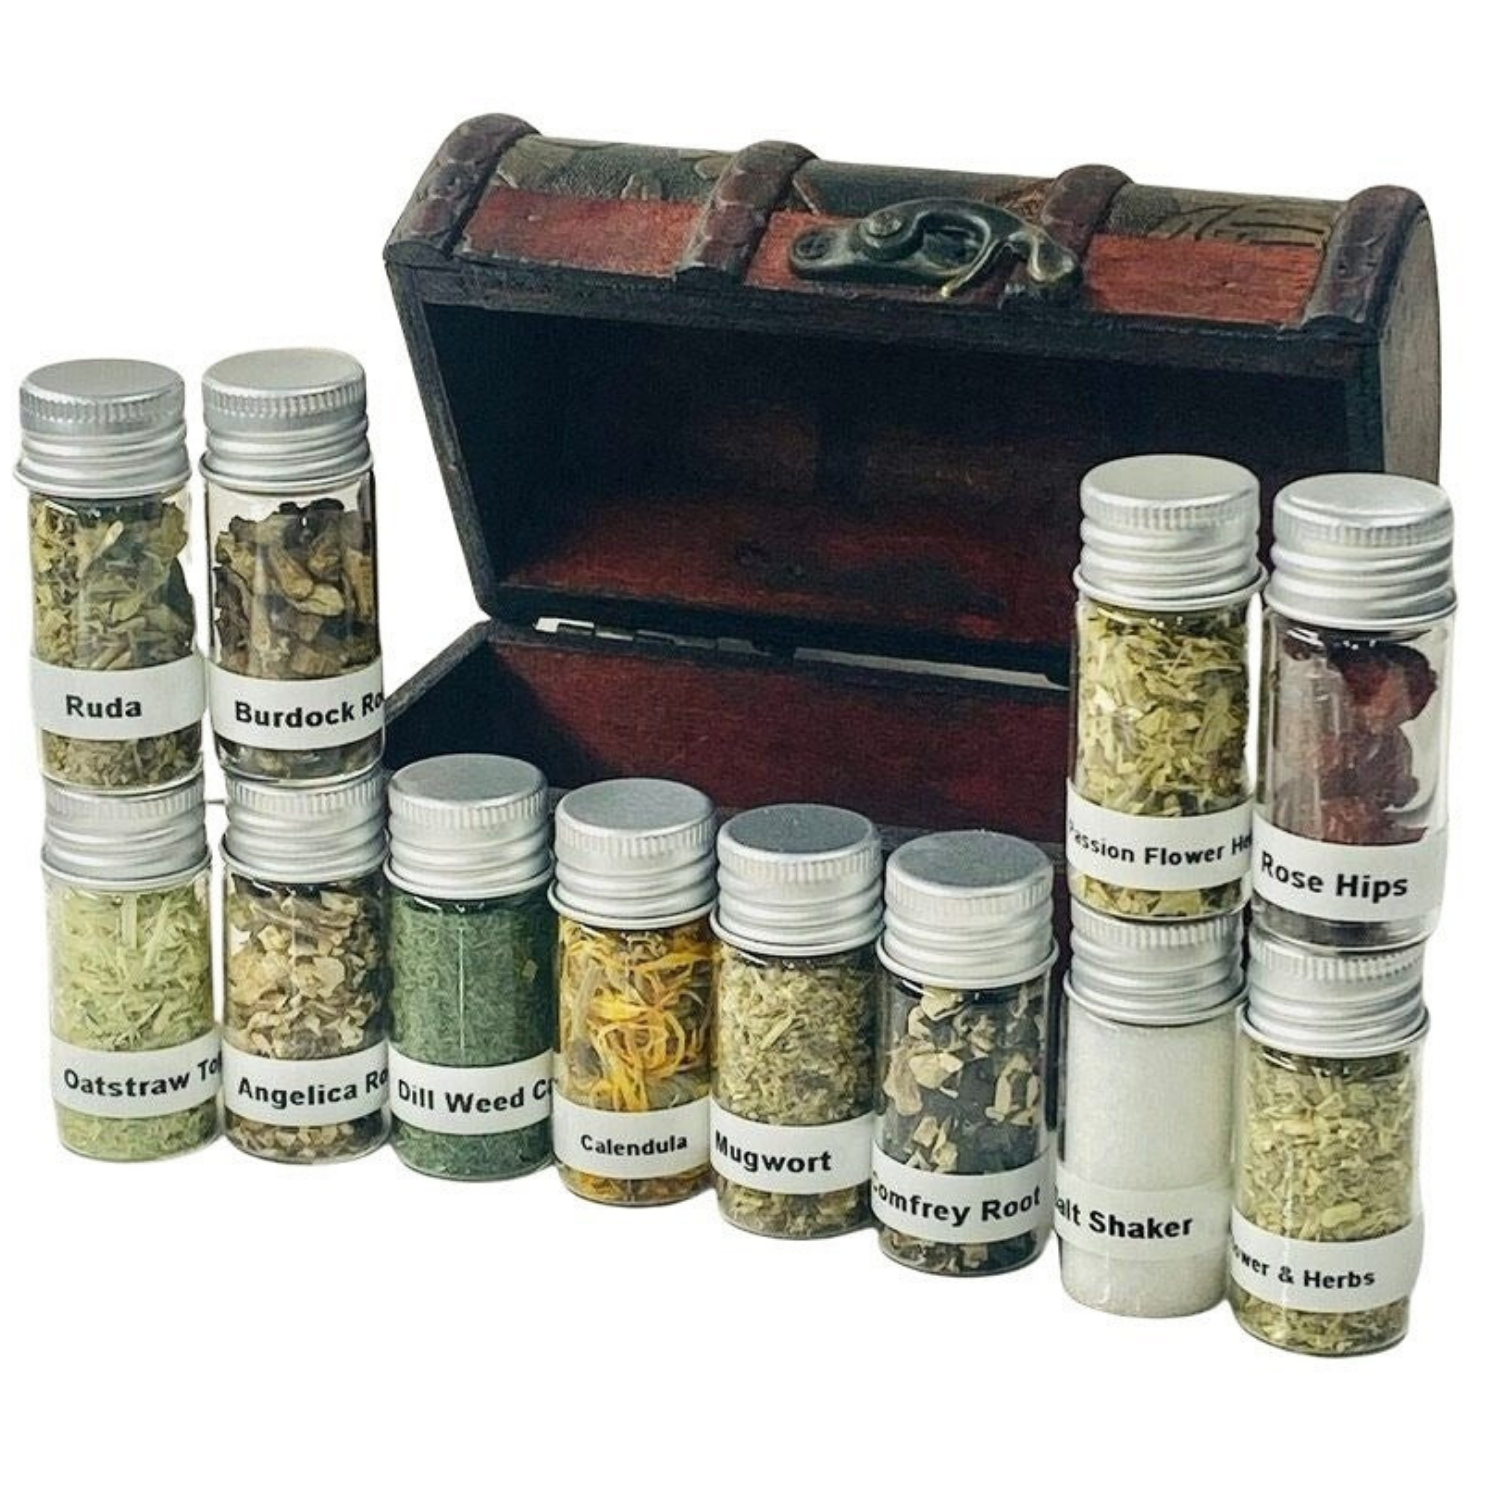 Apothecary Witchcraft Starter Kit Box